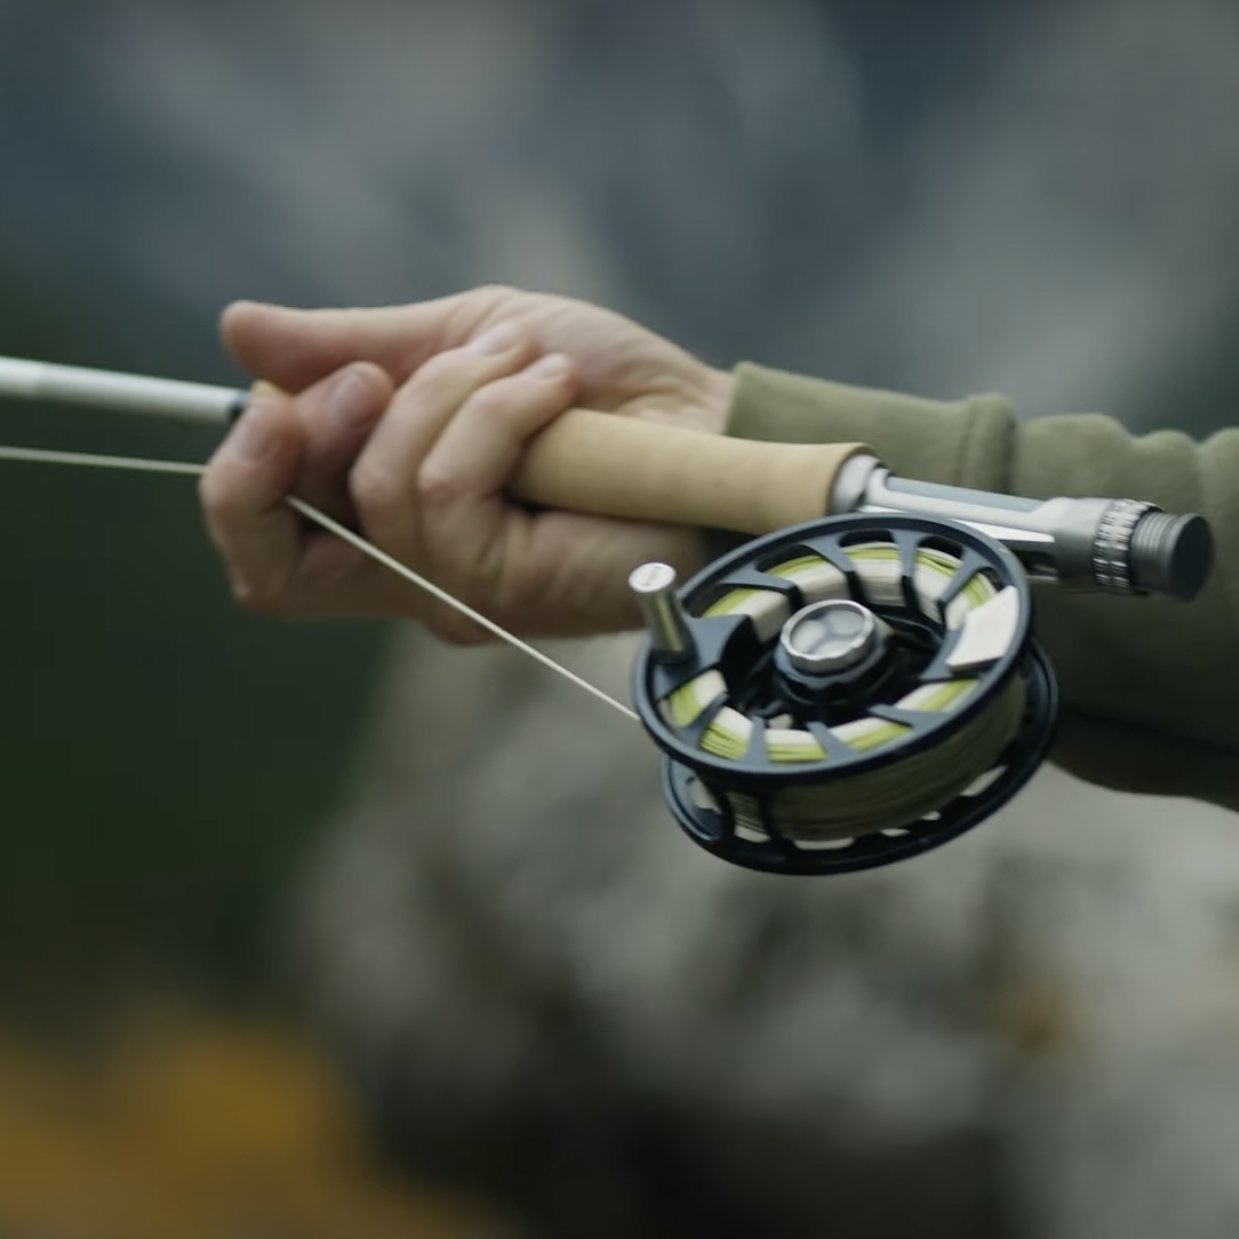 ORVIS HELIOS 4 FLY ROD REVIEW: Is it Really 4x Better